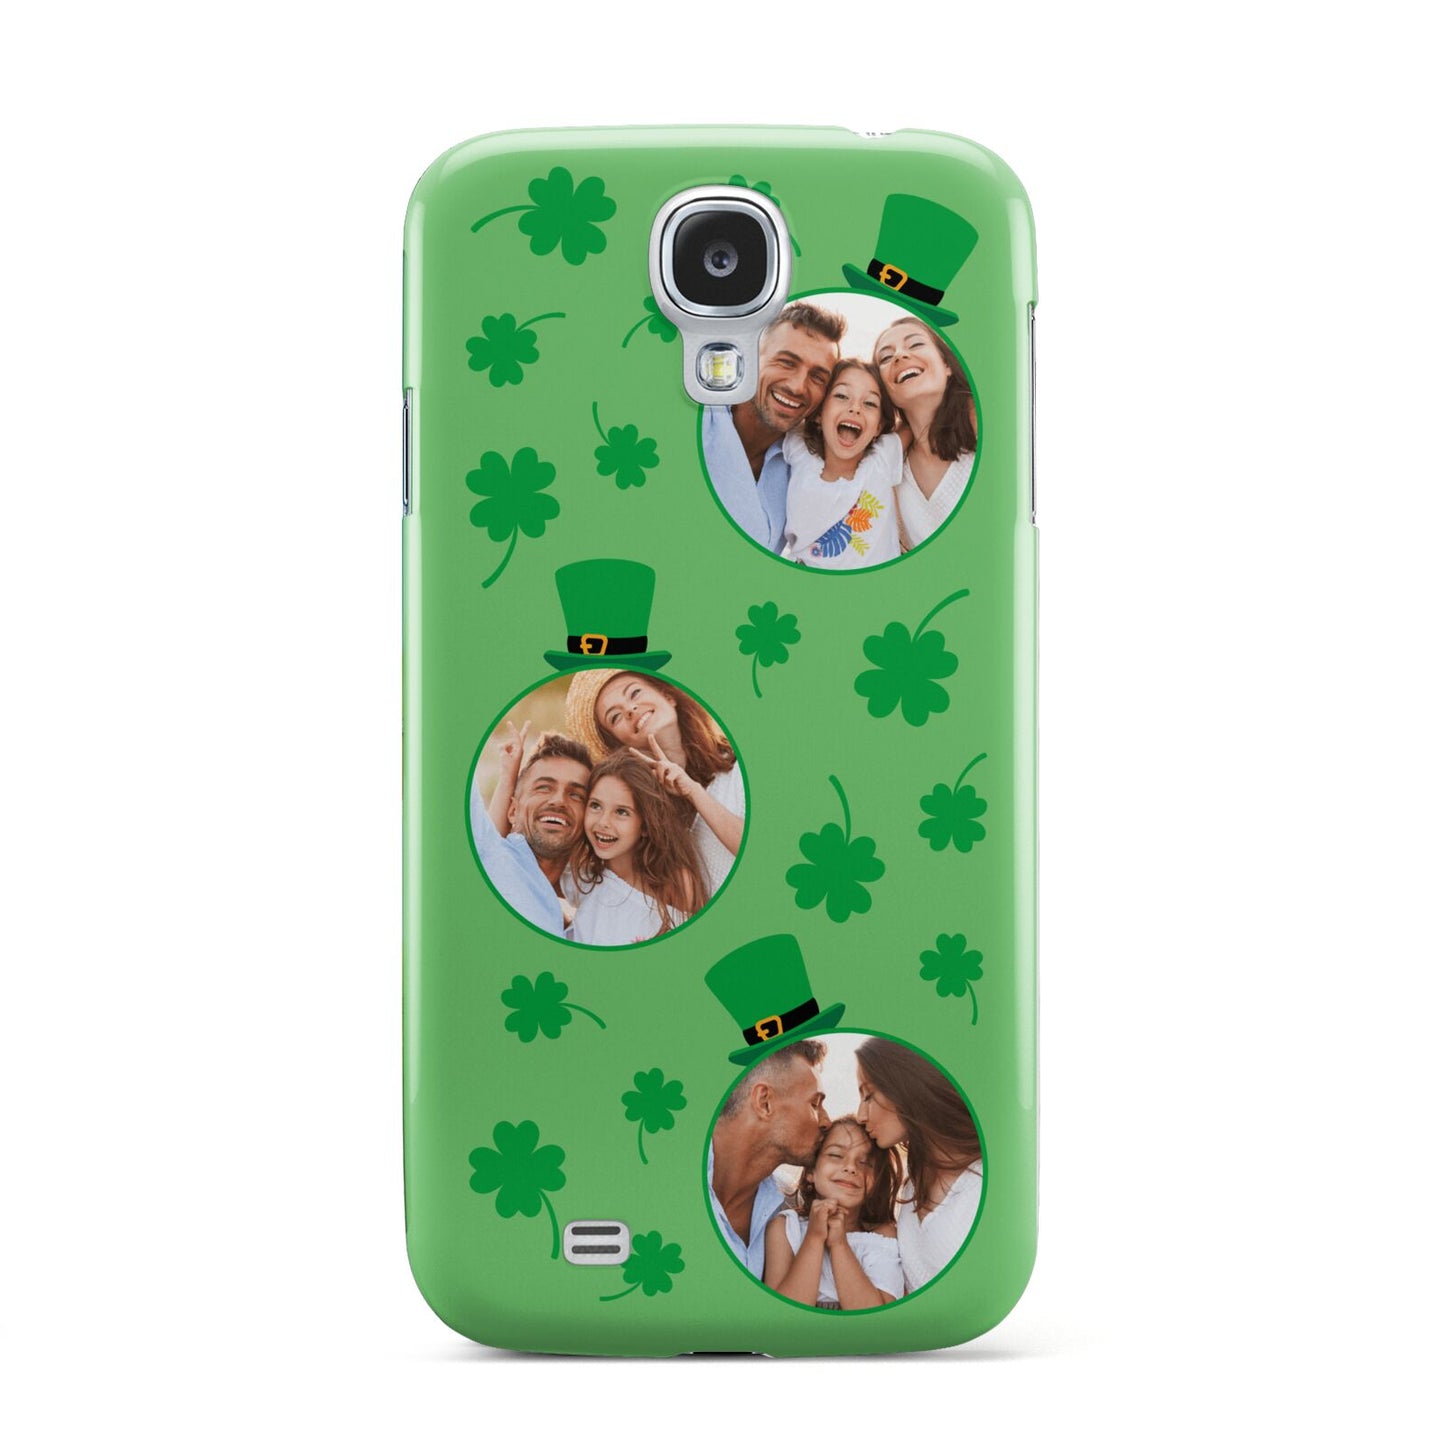 St Patricks Day Personalised Photo Samsung Galaxy S4 Case